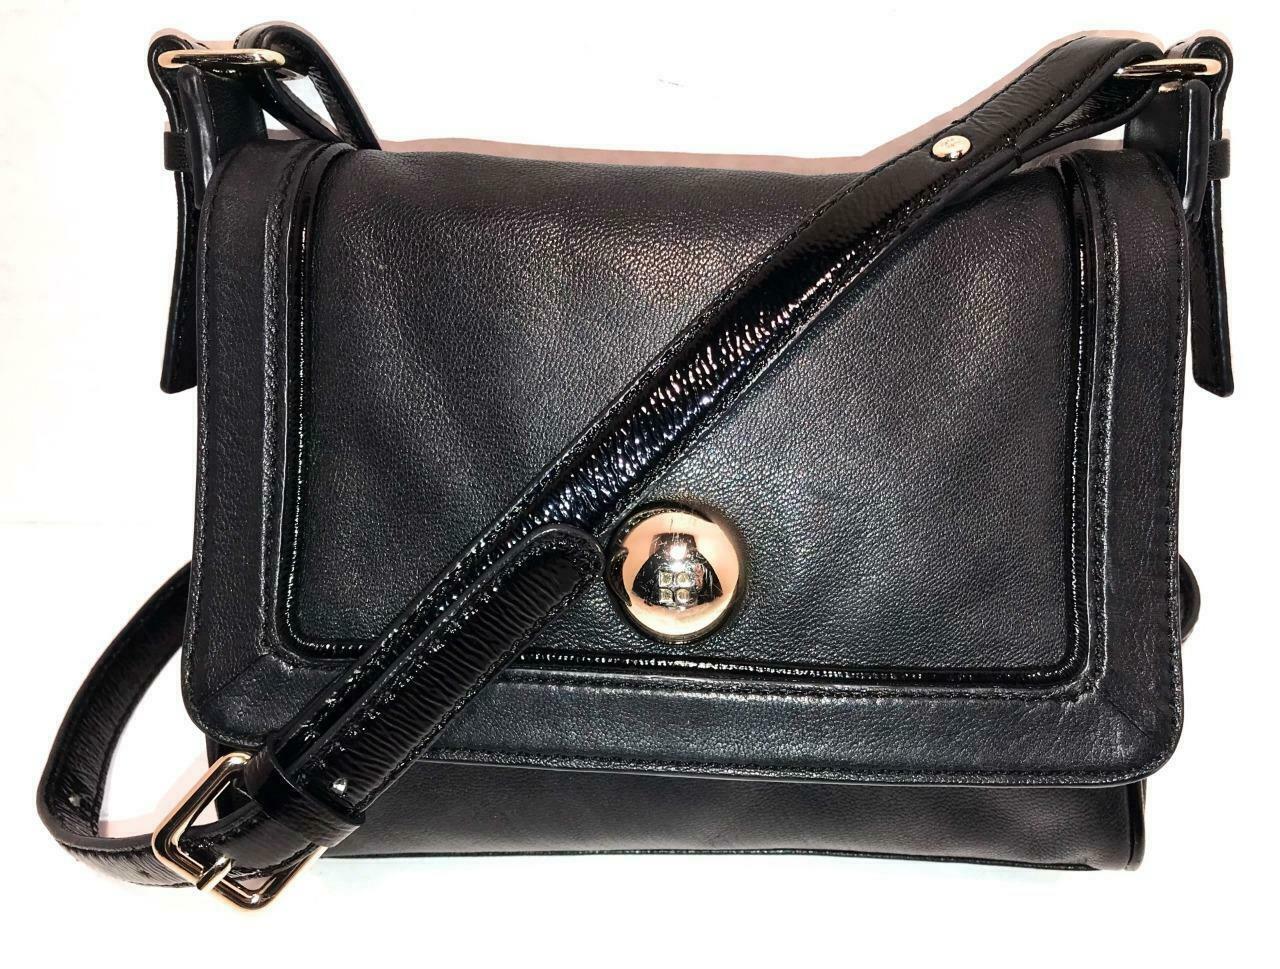 Kate Spade New York Black Leather w/ Patent Leather Accents Small Crossbody Bag - $44.00